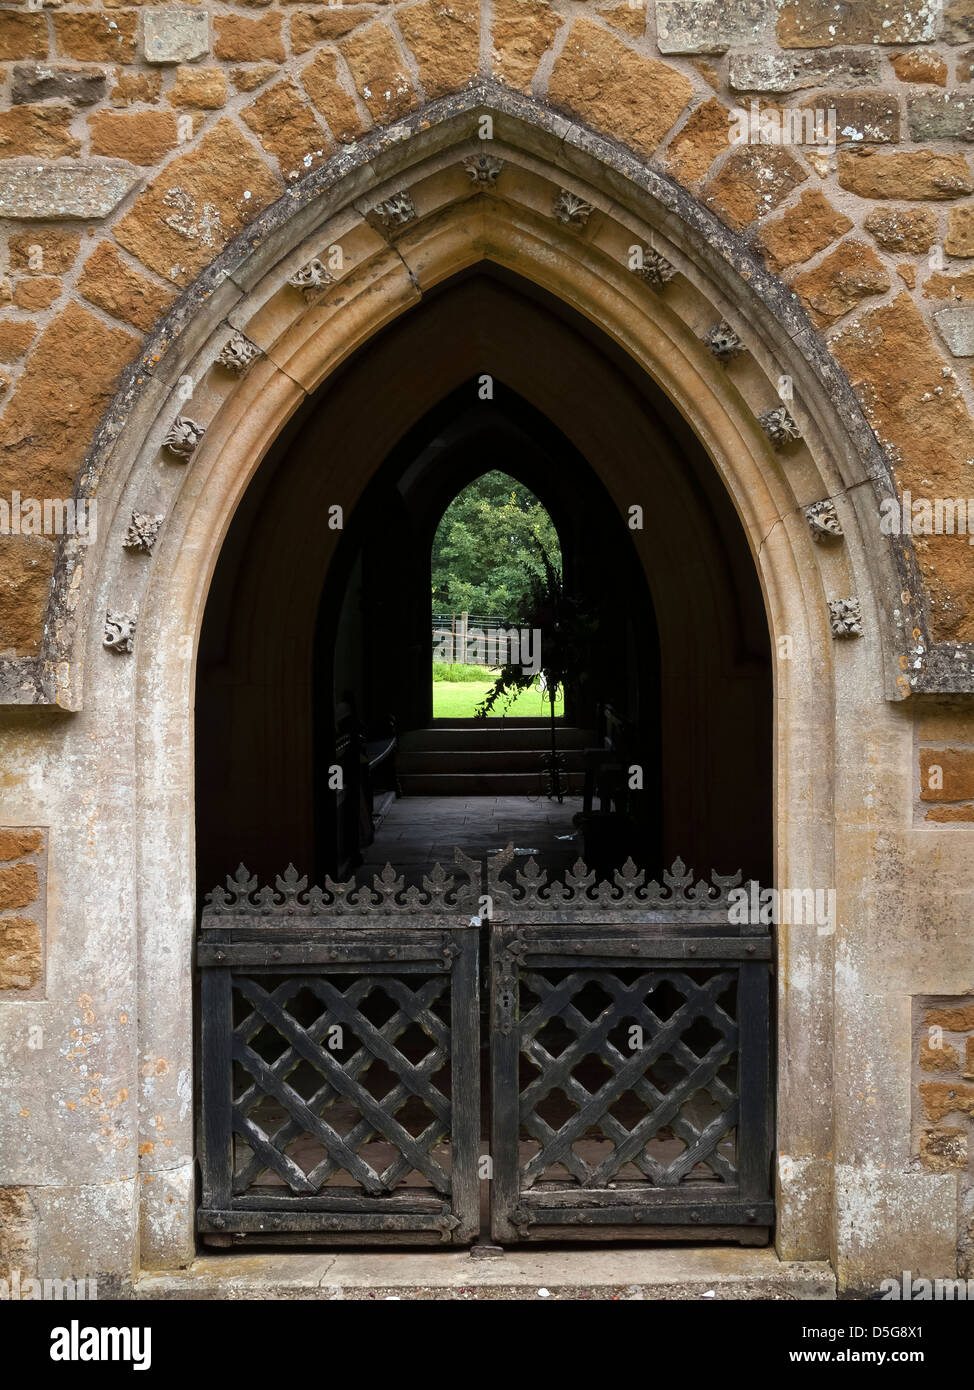 Open Church porch and doors, St James Church, Little Dalby, Melton Mowbray, Leicestershire, England, UK Stock Photo